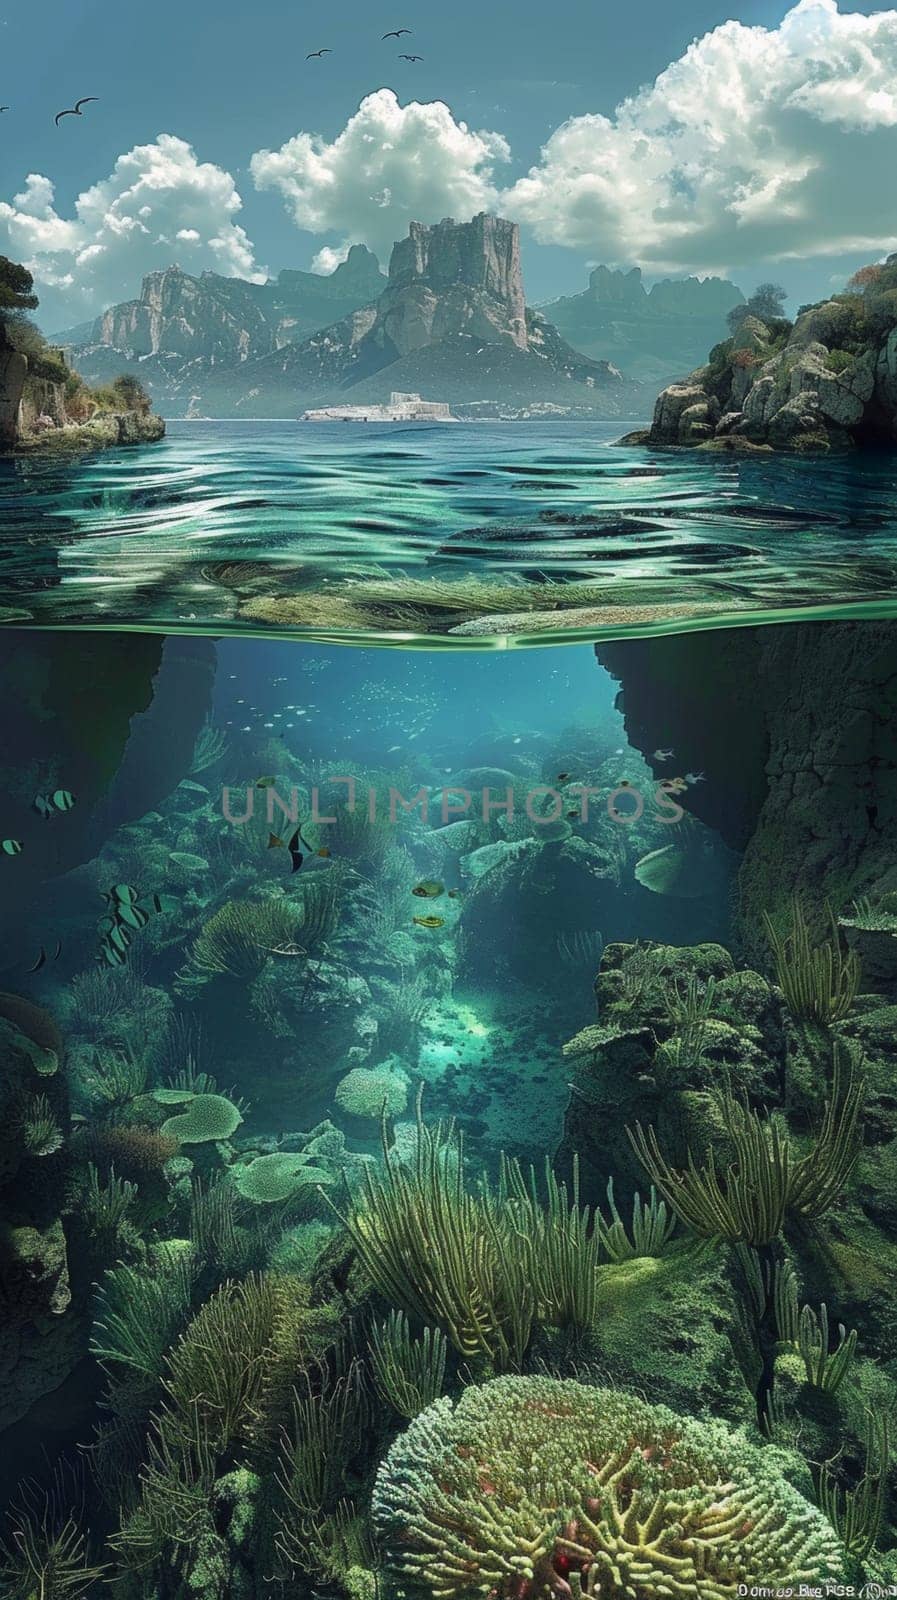 A view of a beautiful underwater scene with lots of fish